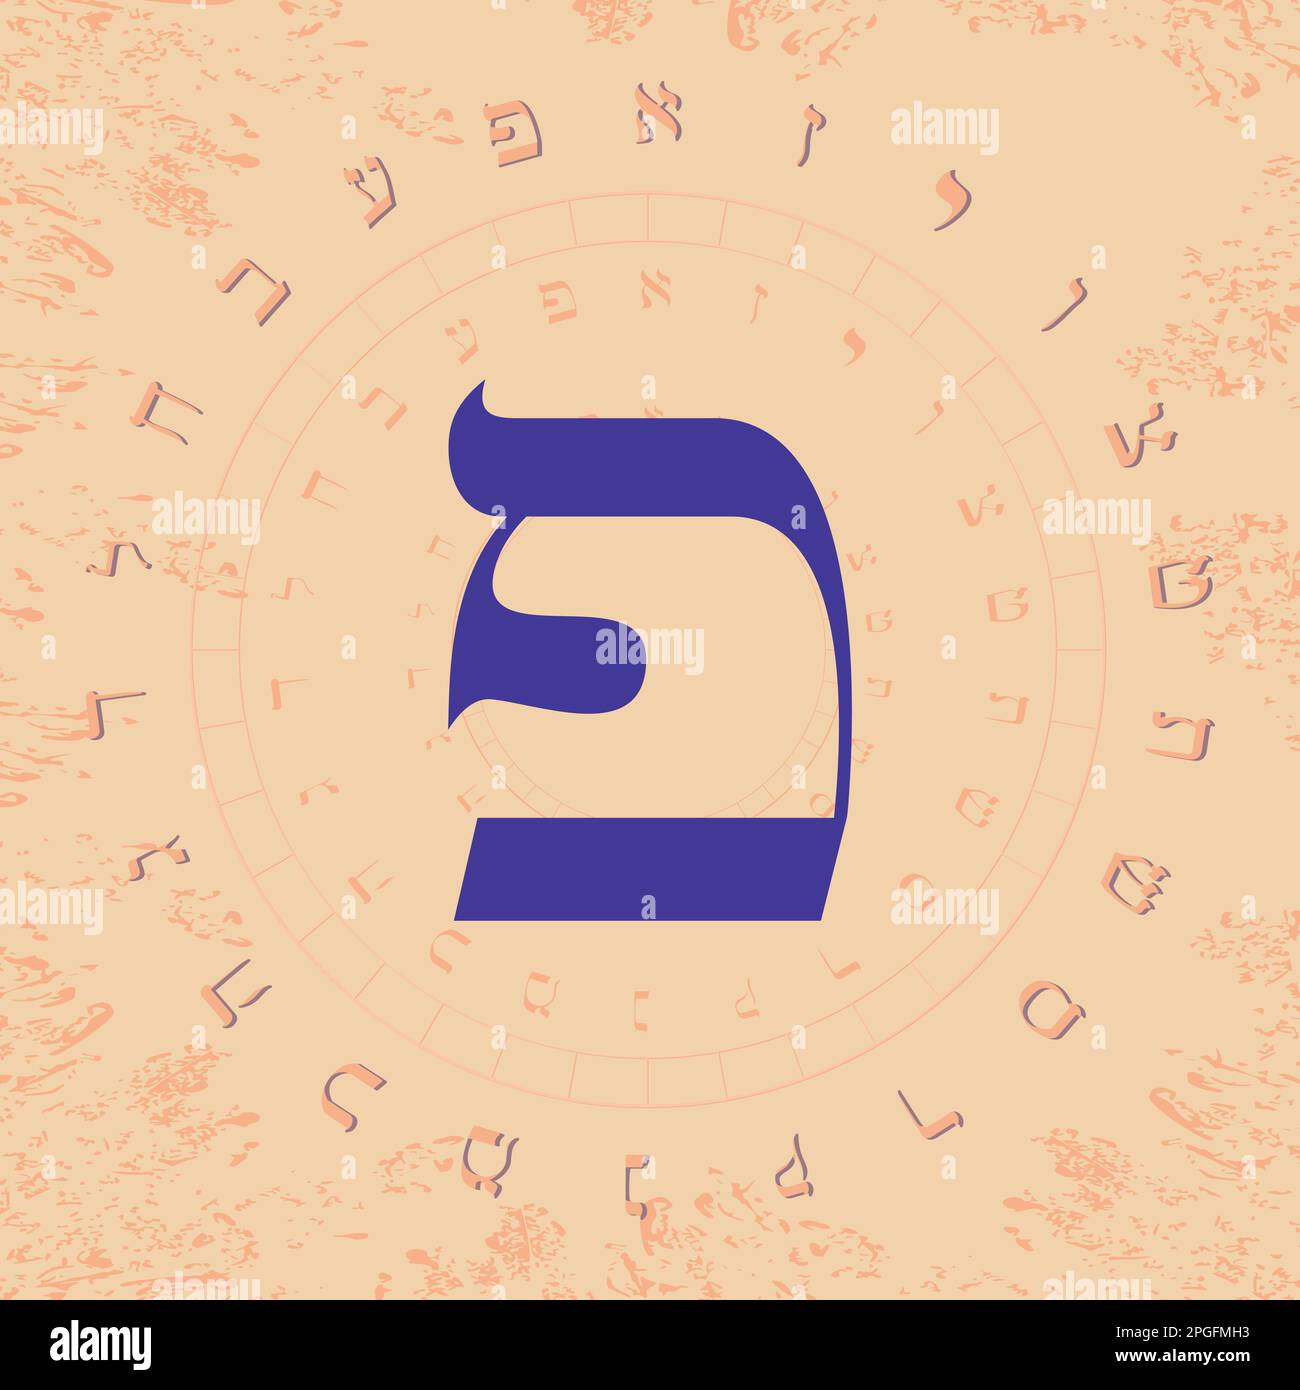 Vector illustration of the Hebrew alphabet in circular design. Hebrew letter called Peh large and blue. Stock Vector